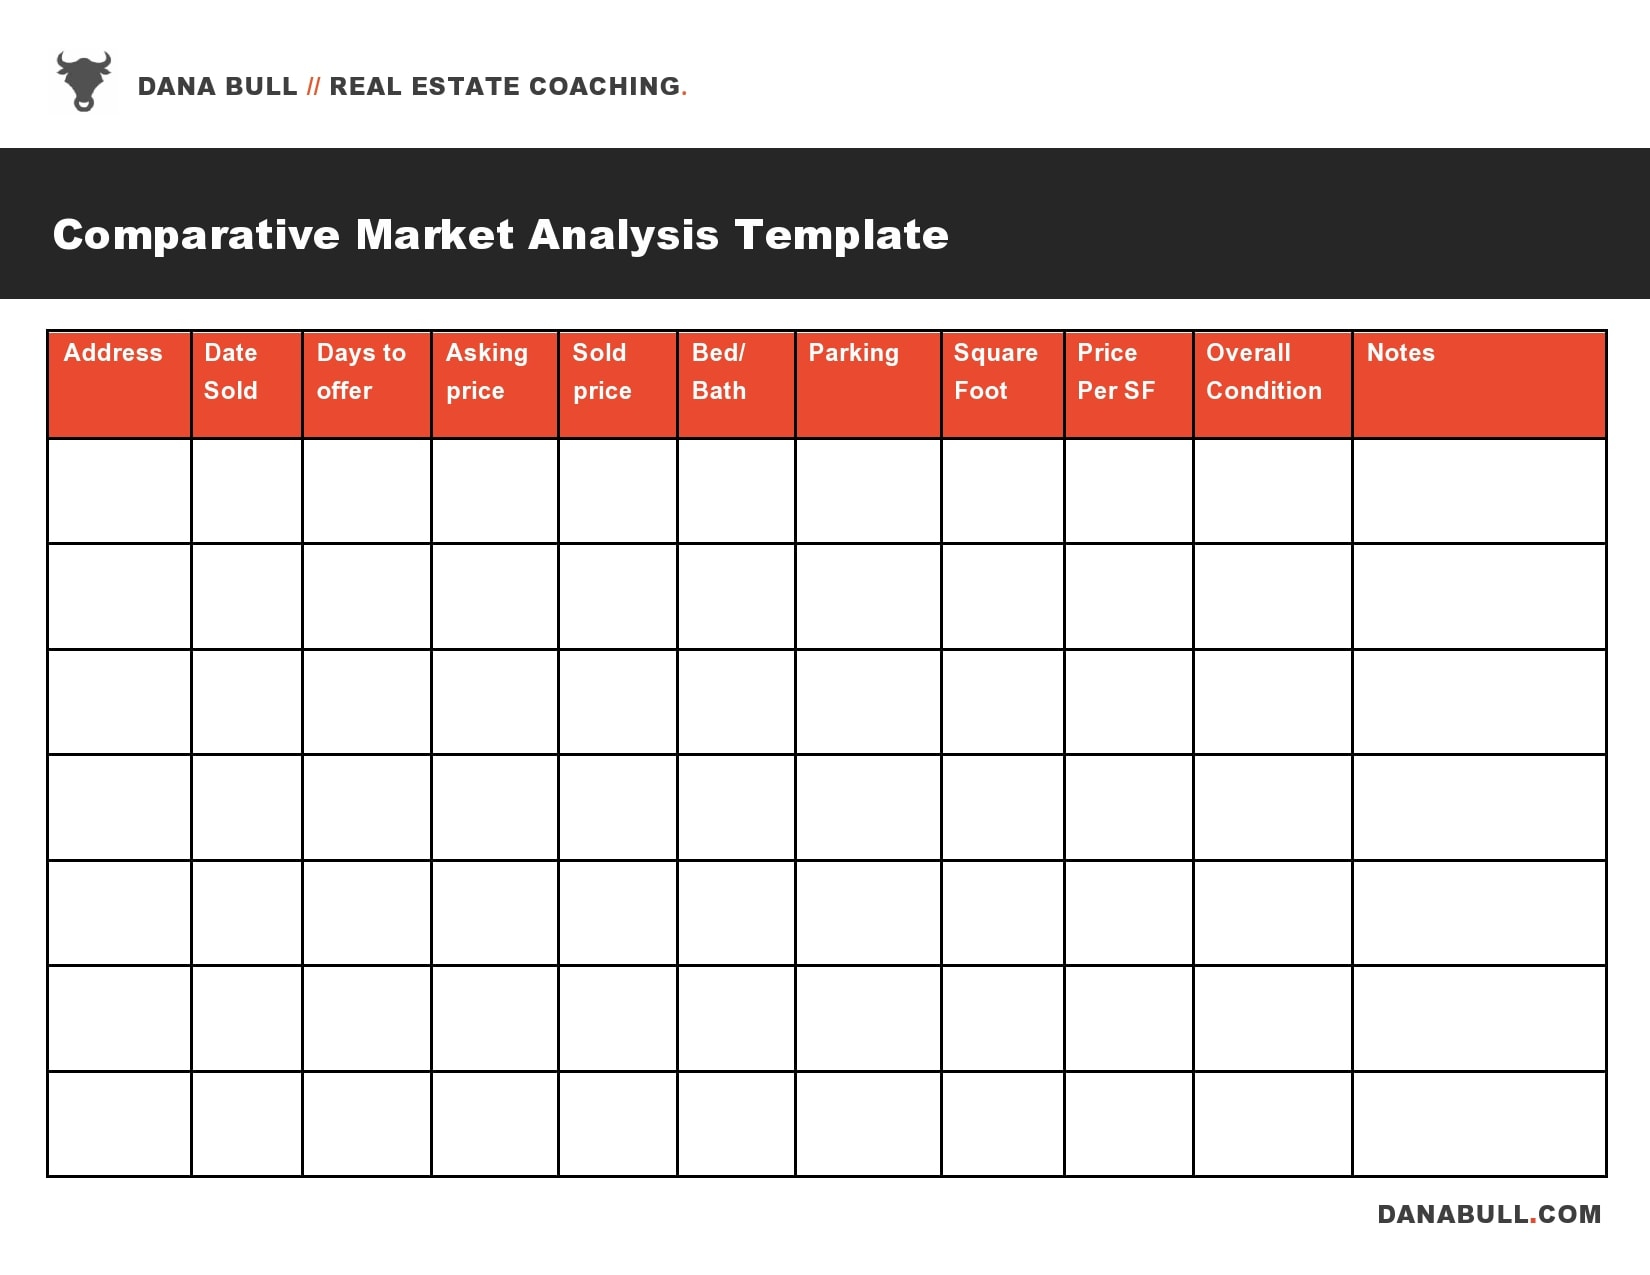 11 Best Market Analysis Templates (Free Download) - TemplateArchive Throughout Comparative Market Analysis Real Estate Template With Regard To Comparative Market Analysis Real Estate Template